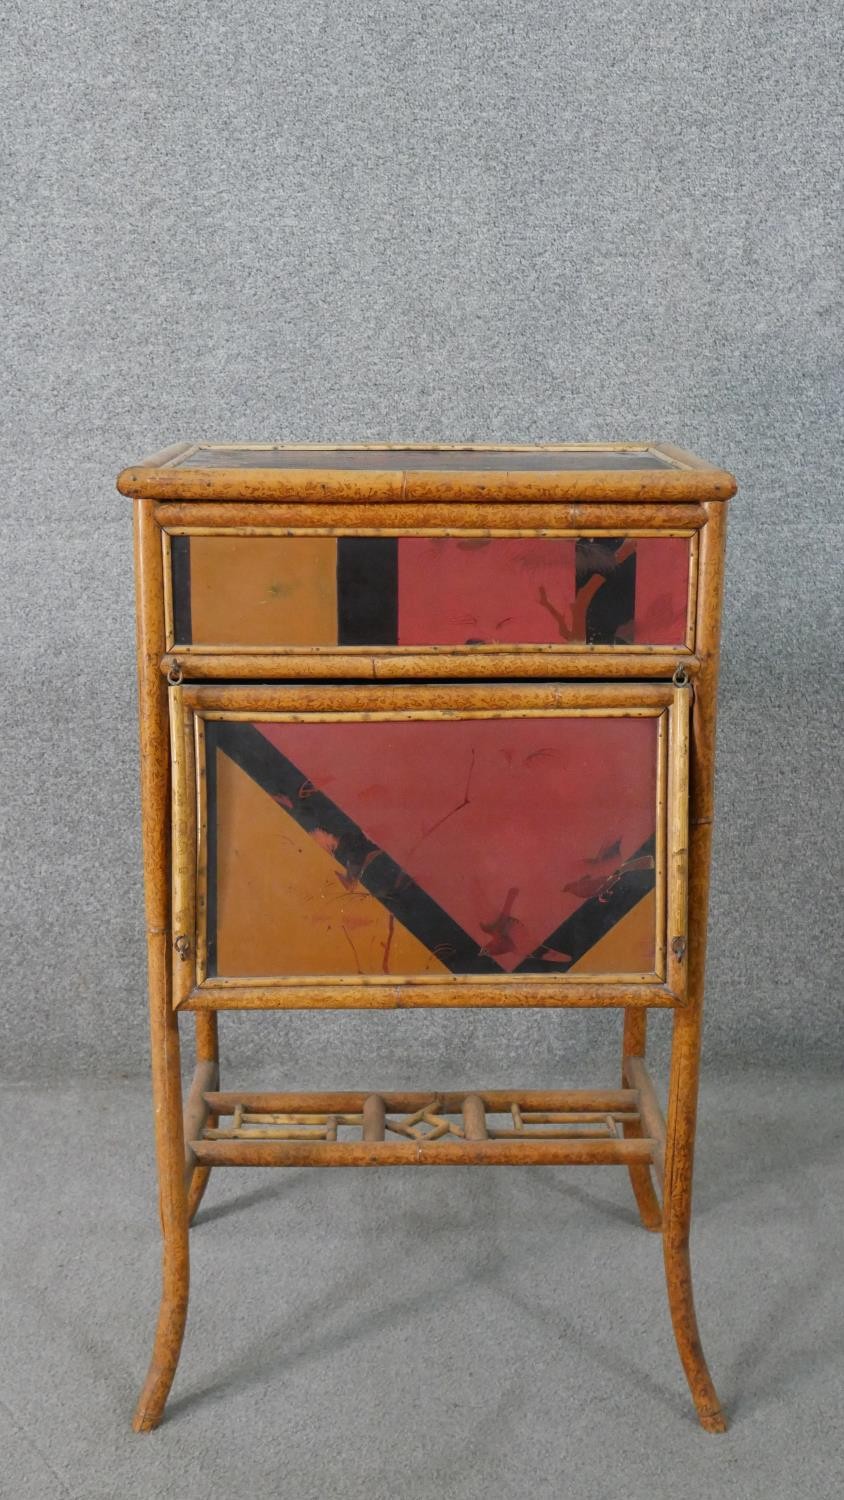 An Aesthetic Movement bamboo work table, with Japanese lacquered panels, the lid opening to reveal a